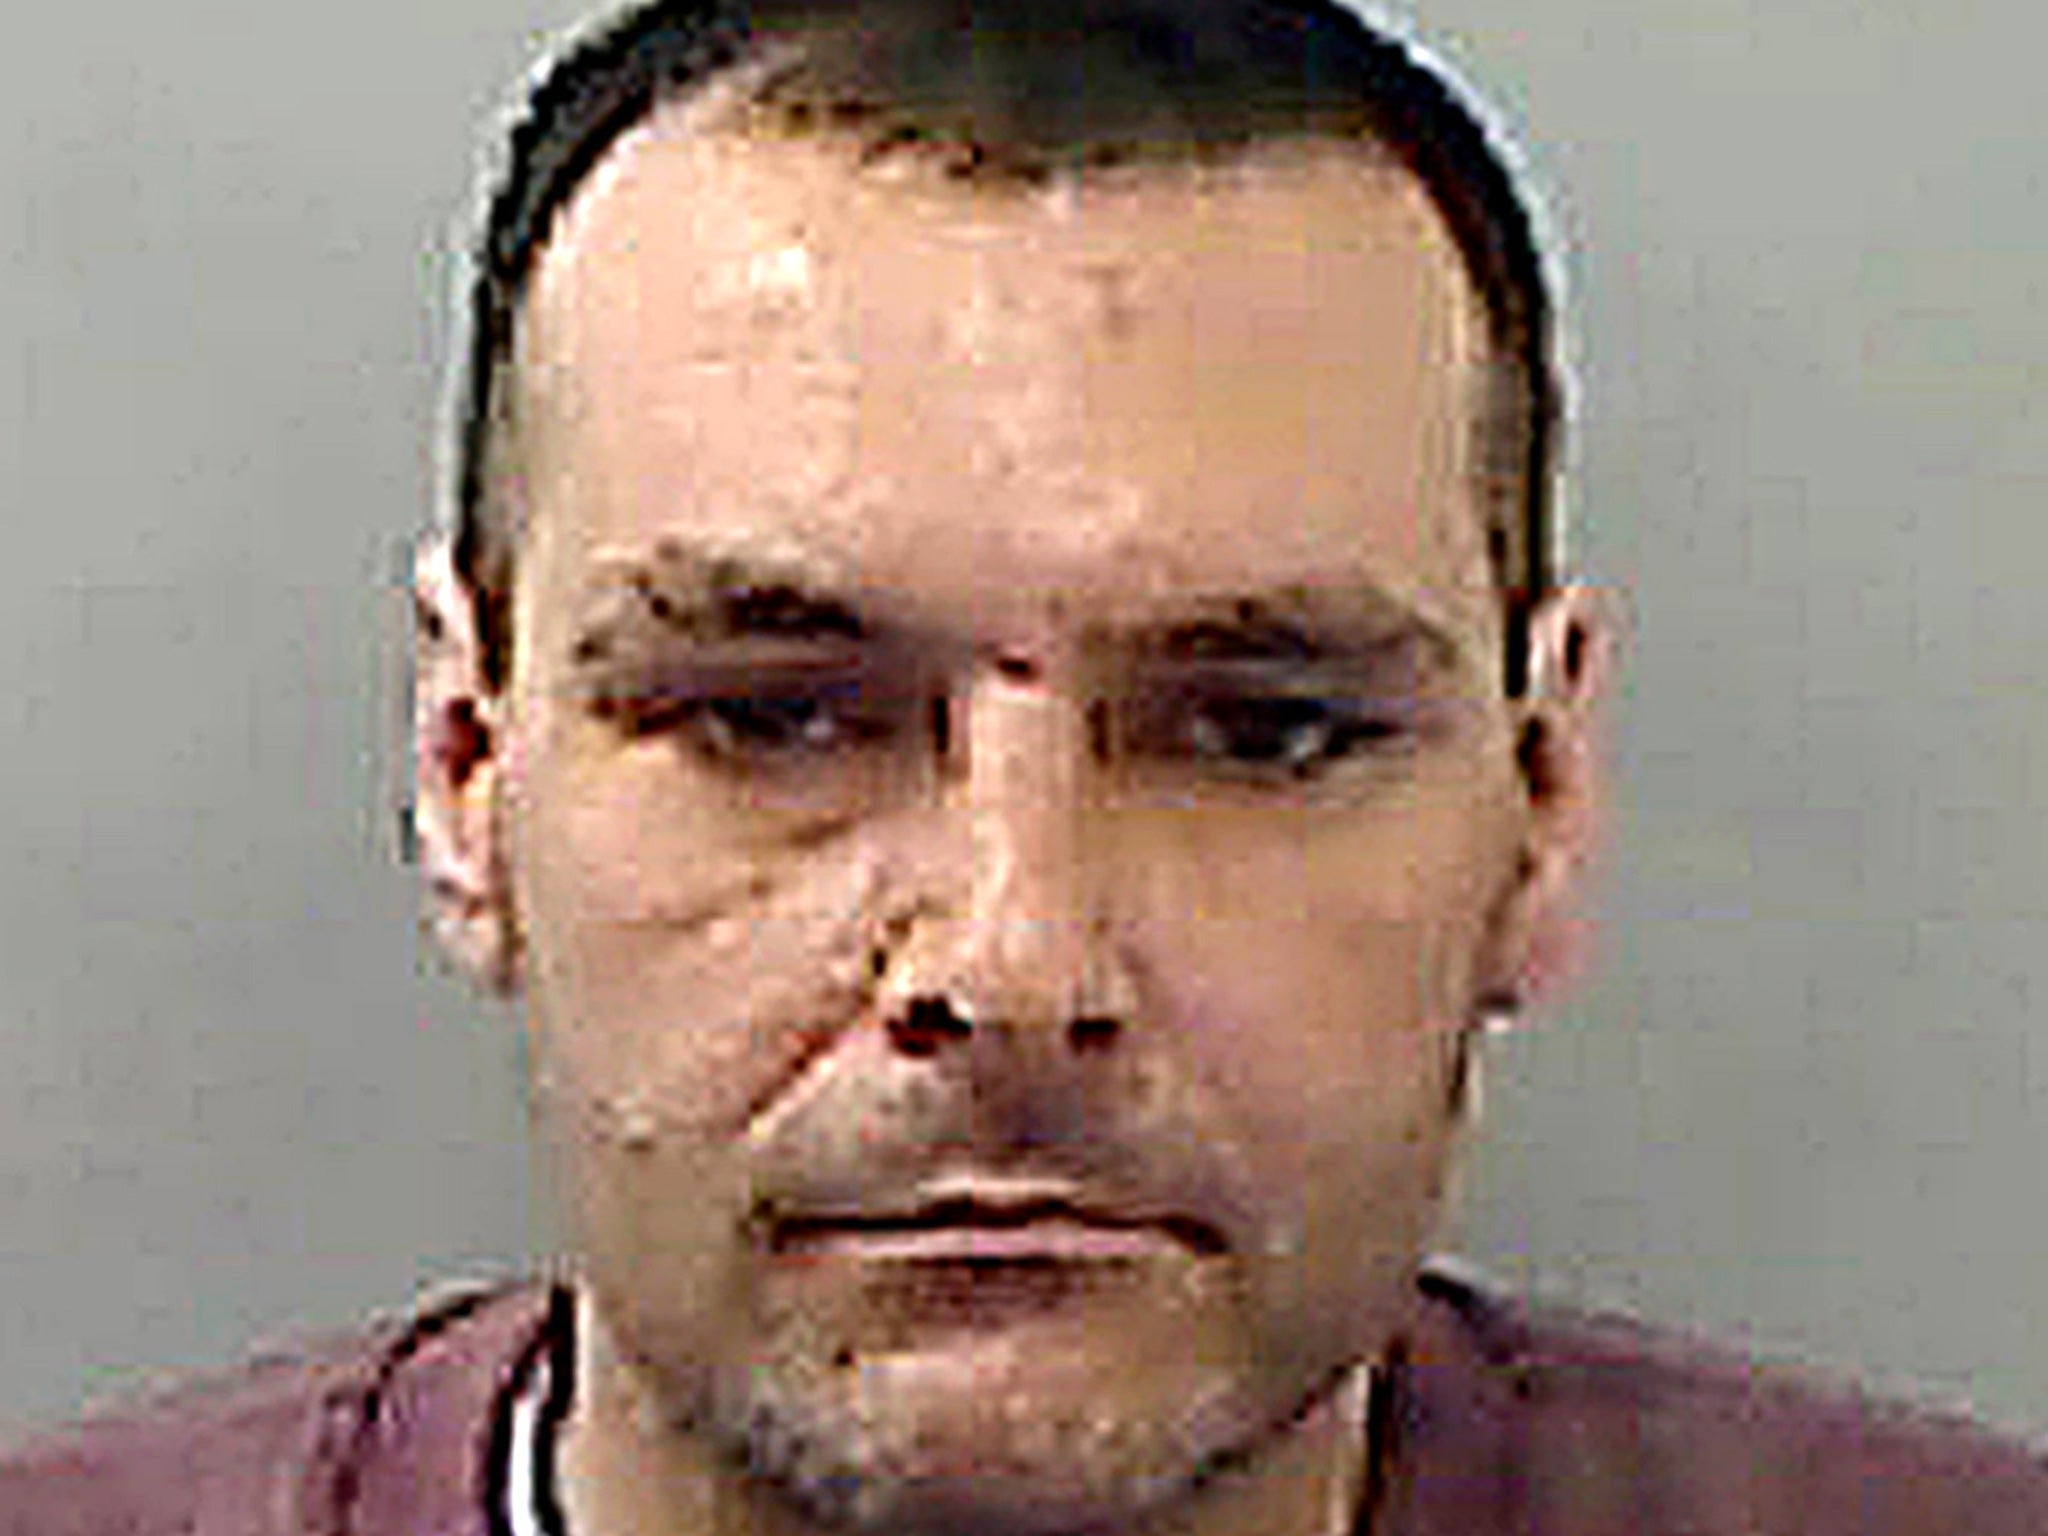 Child rapist Mark Madrell, 37, who has been jailed for 23 years